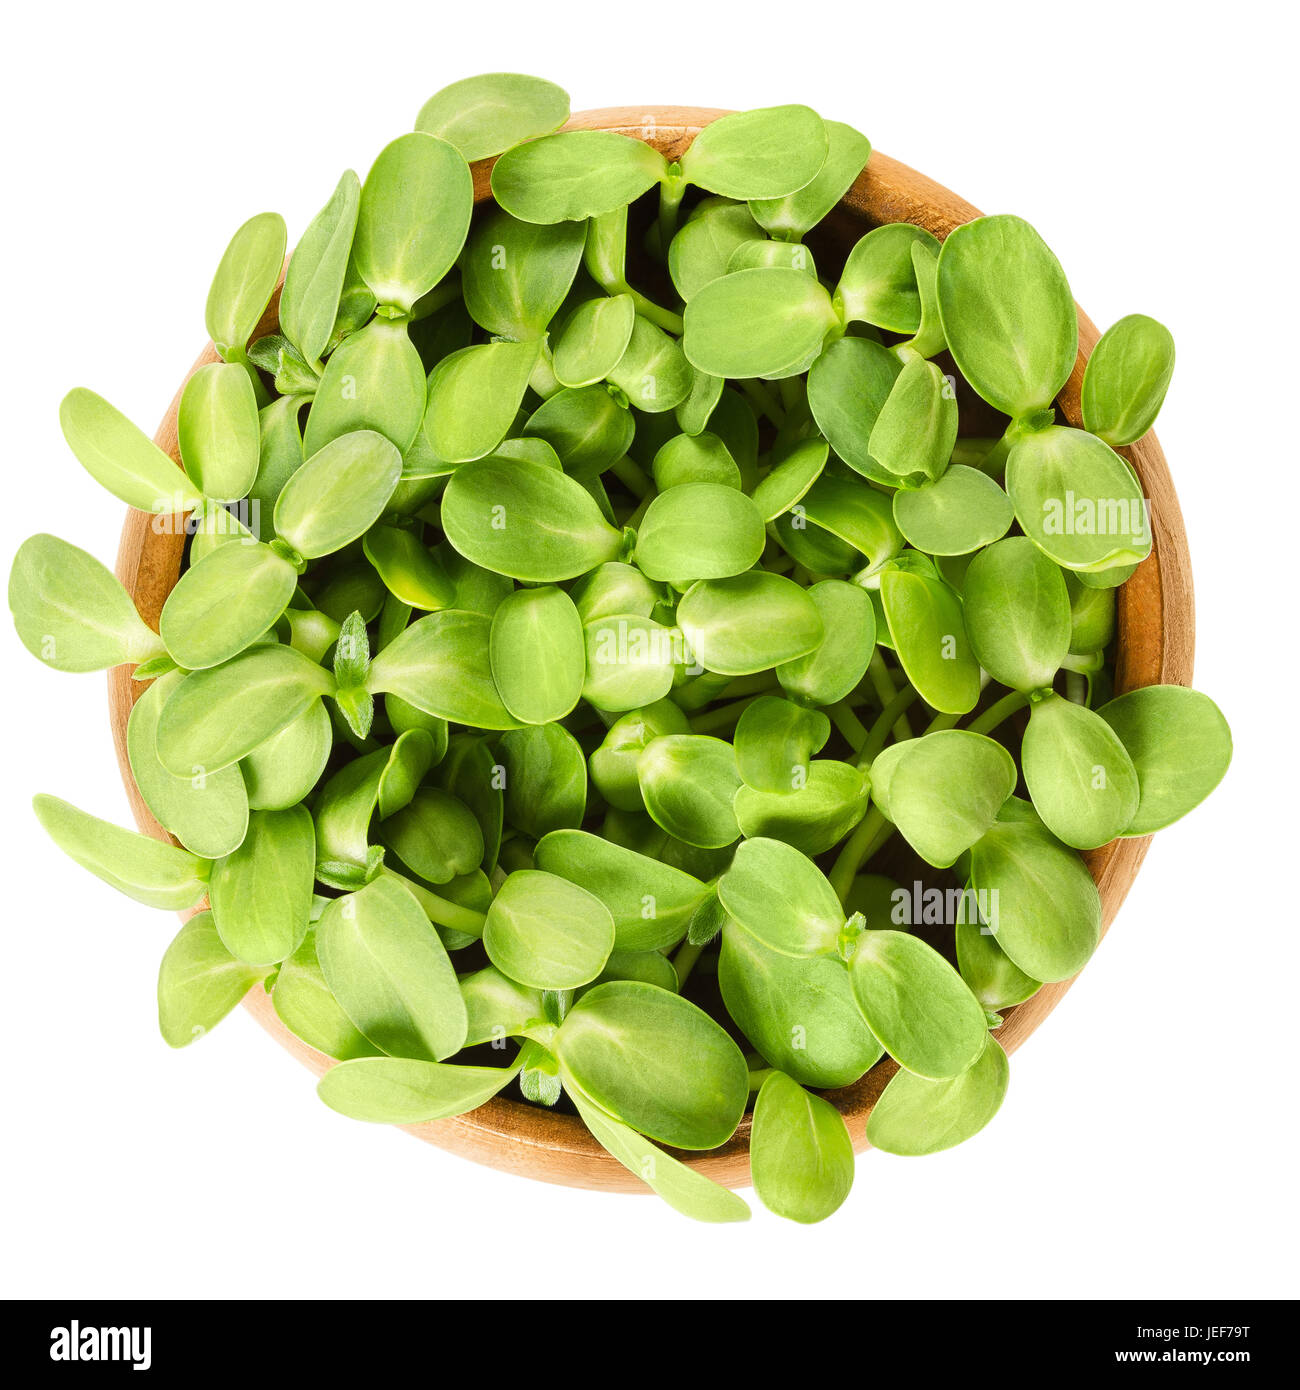 Sunflower shoots in wooden bowl. Fresh sprouts of the oilseed Helianthus Annuus, the common sunflower. Green edible plants. Isolated macro food photo. Stock Photo